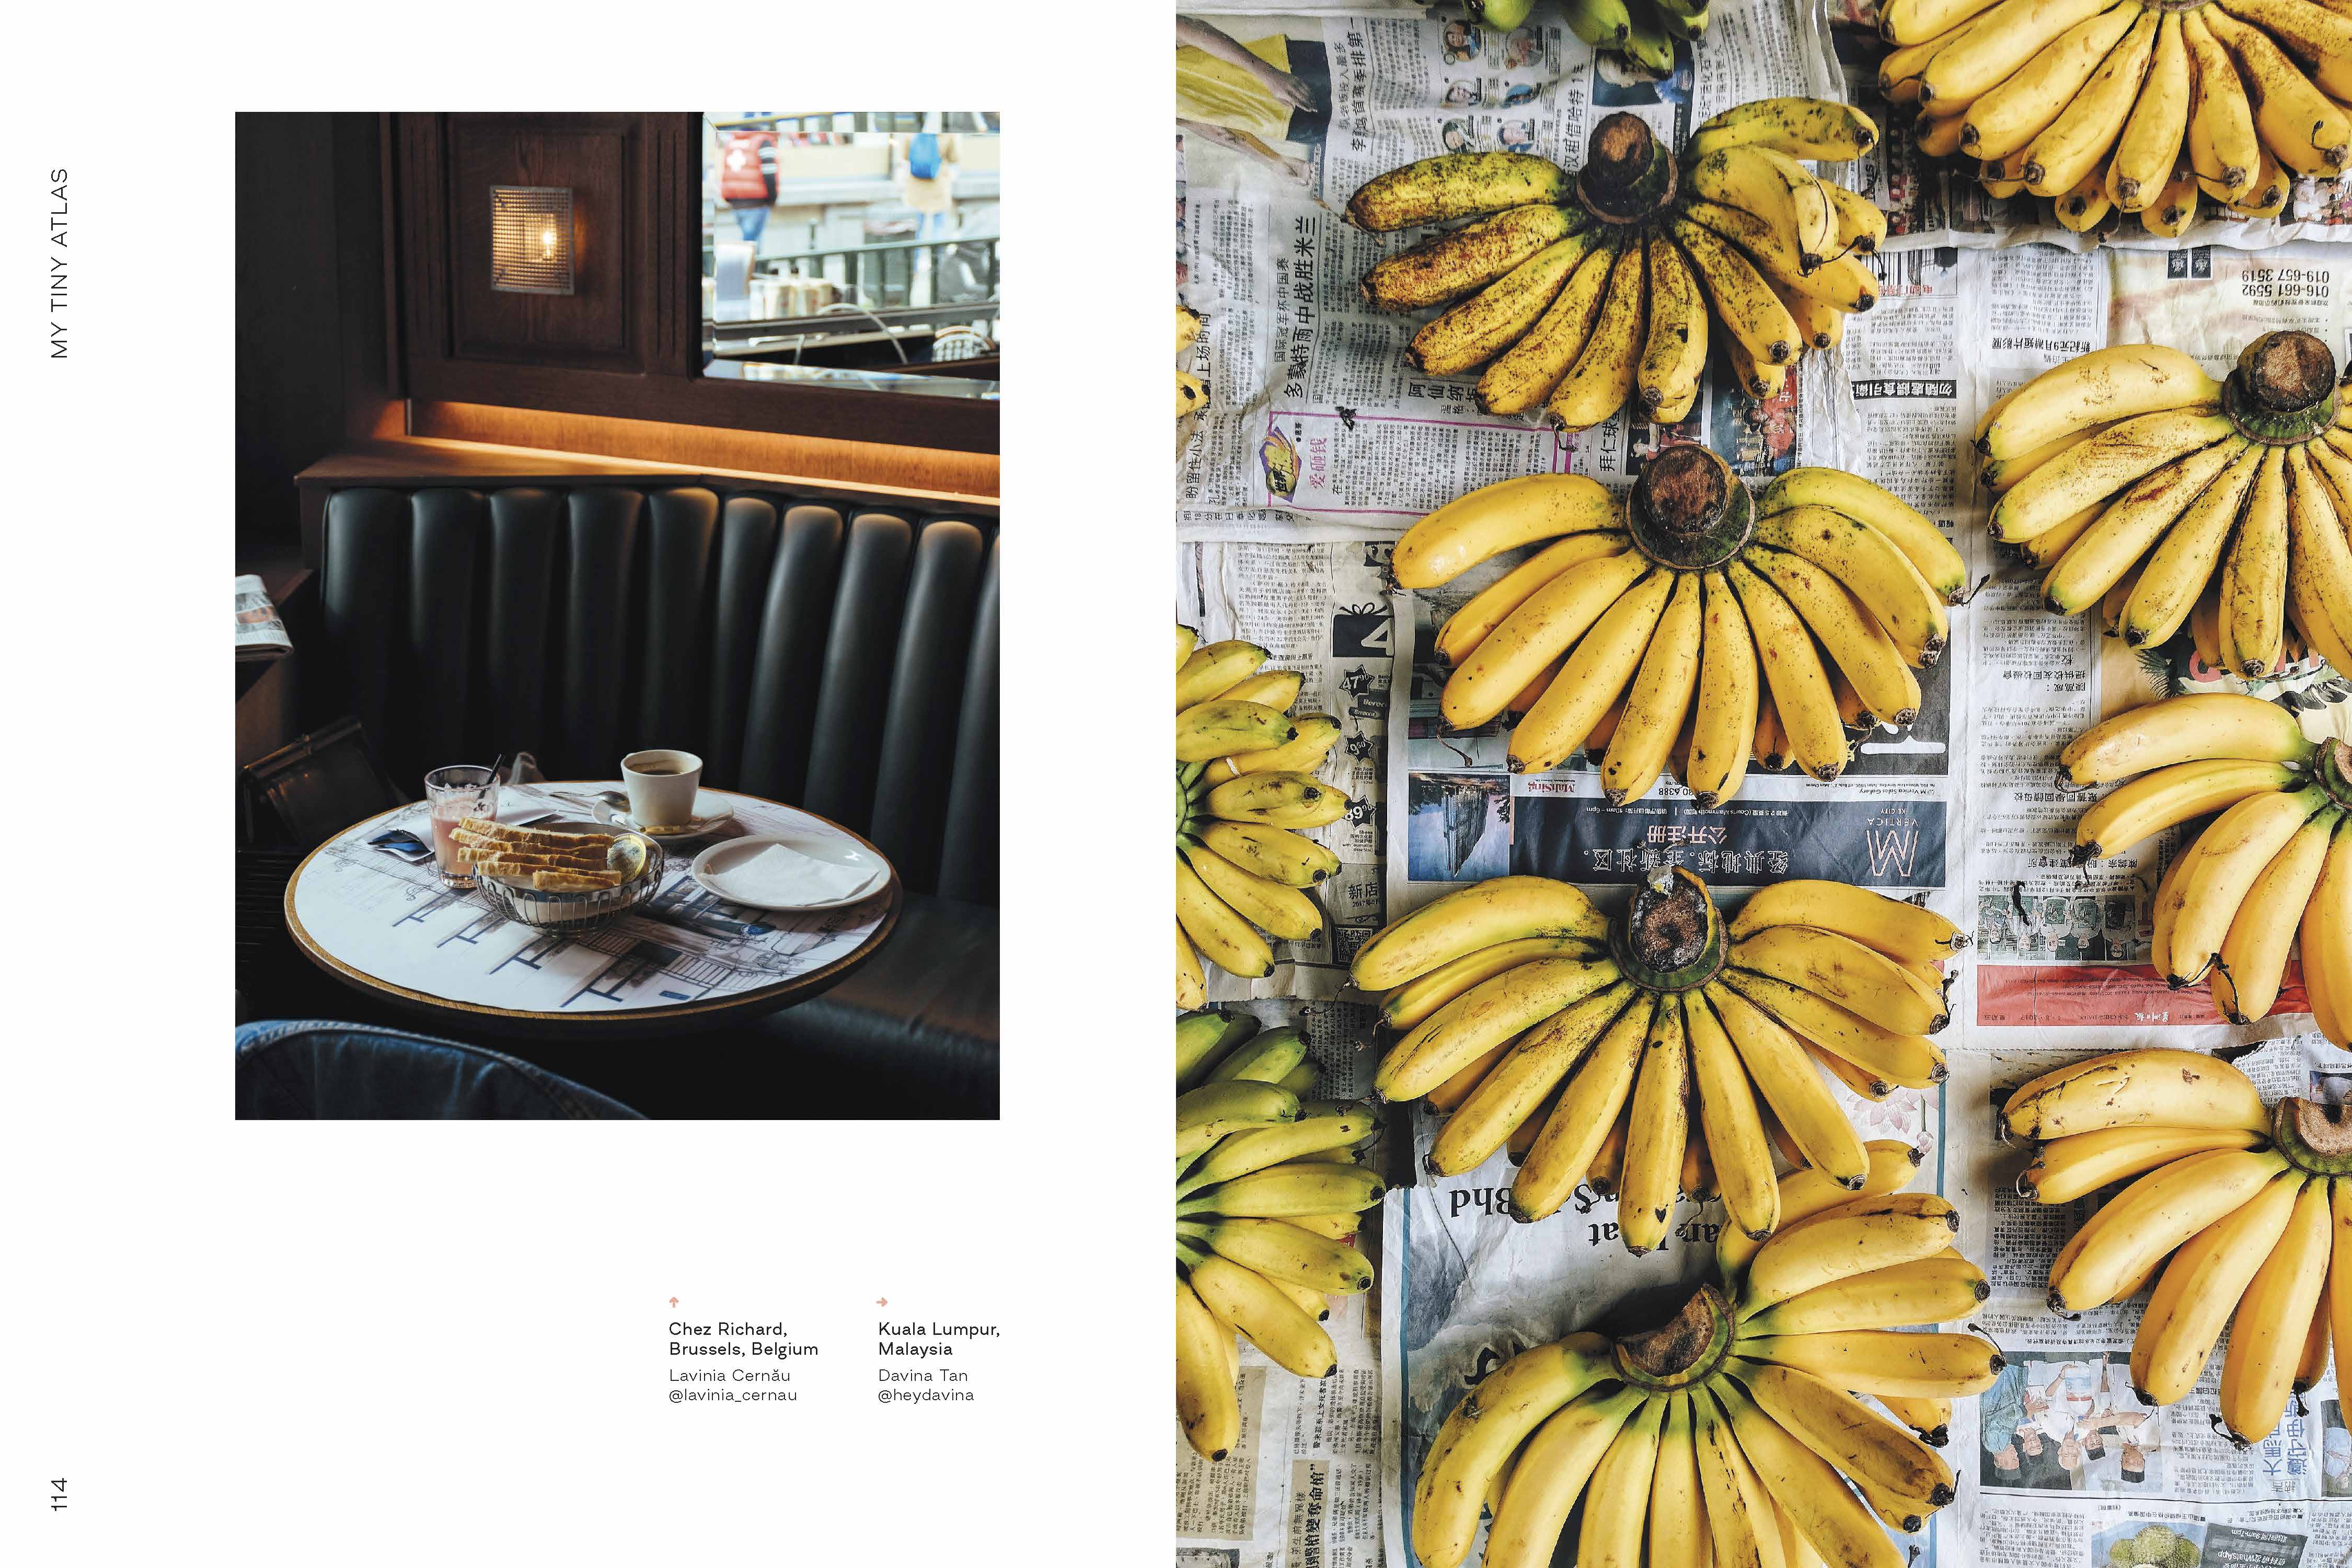 Cafe table in Brussels Belgium and banana bundles on display in Malaysia